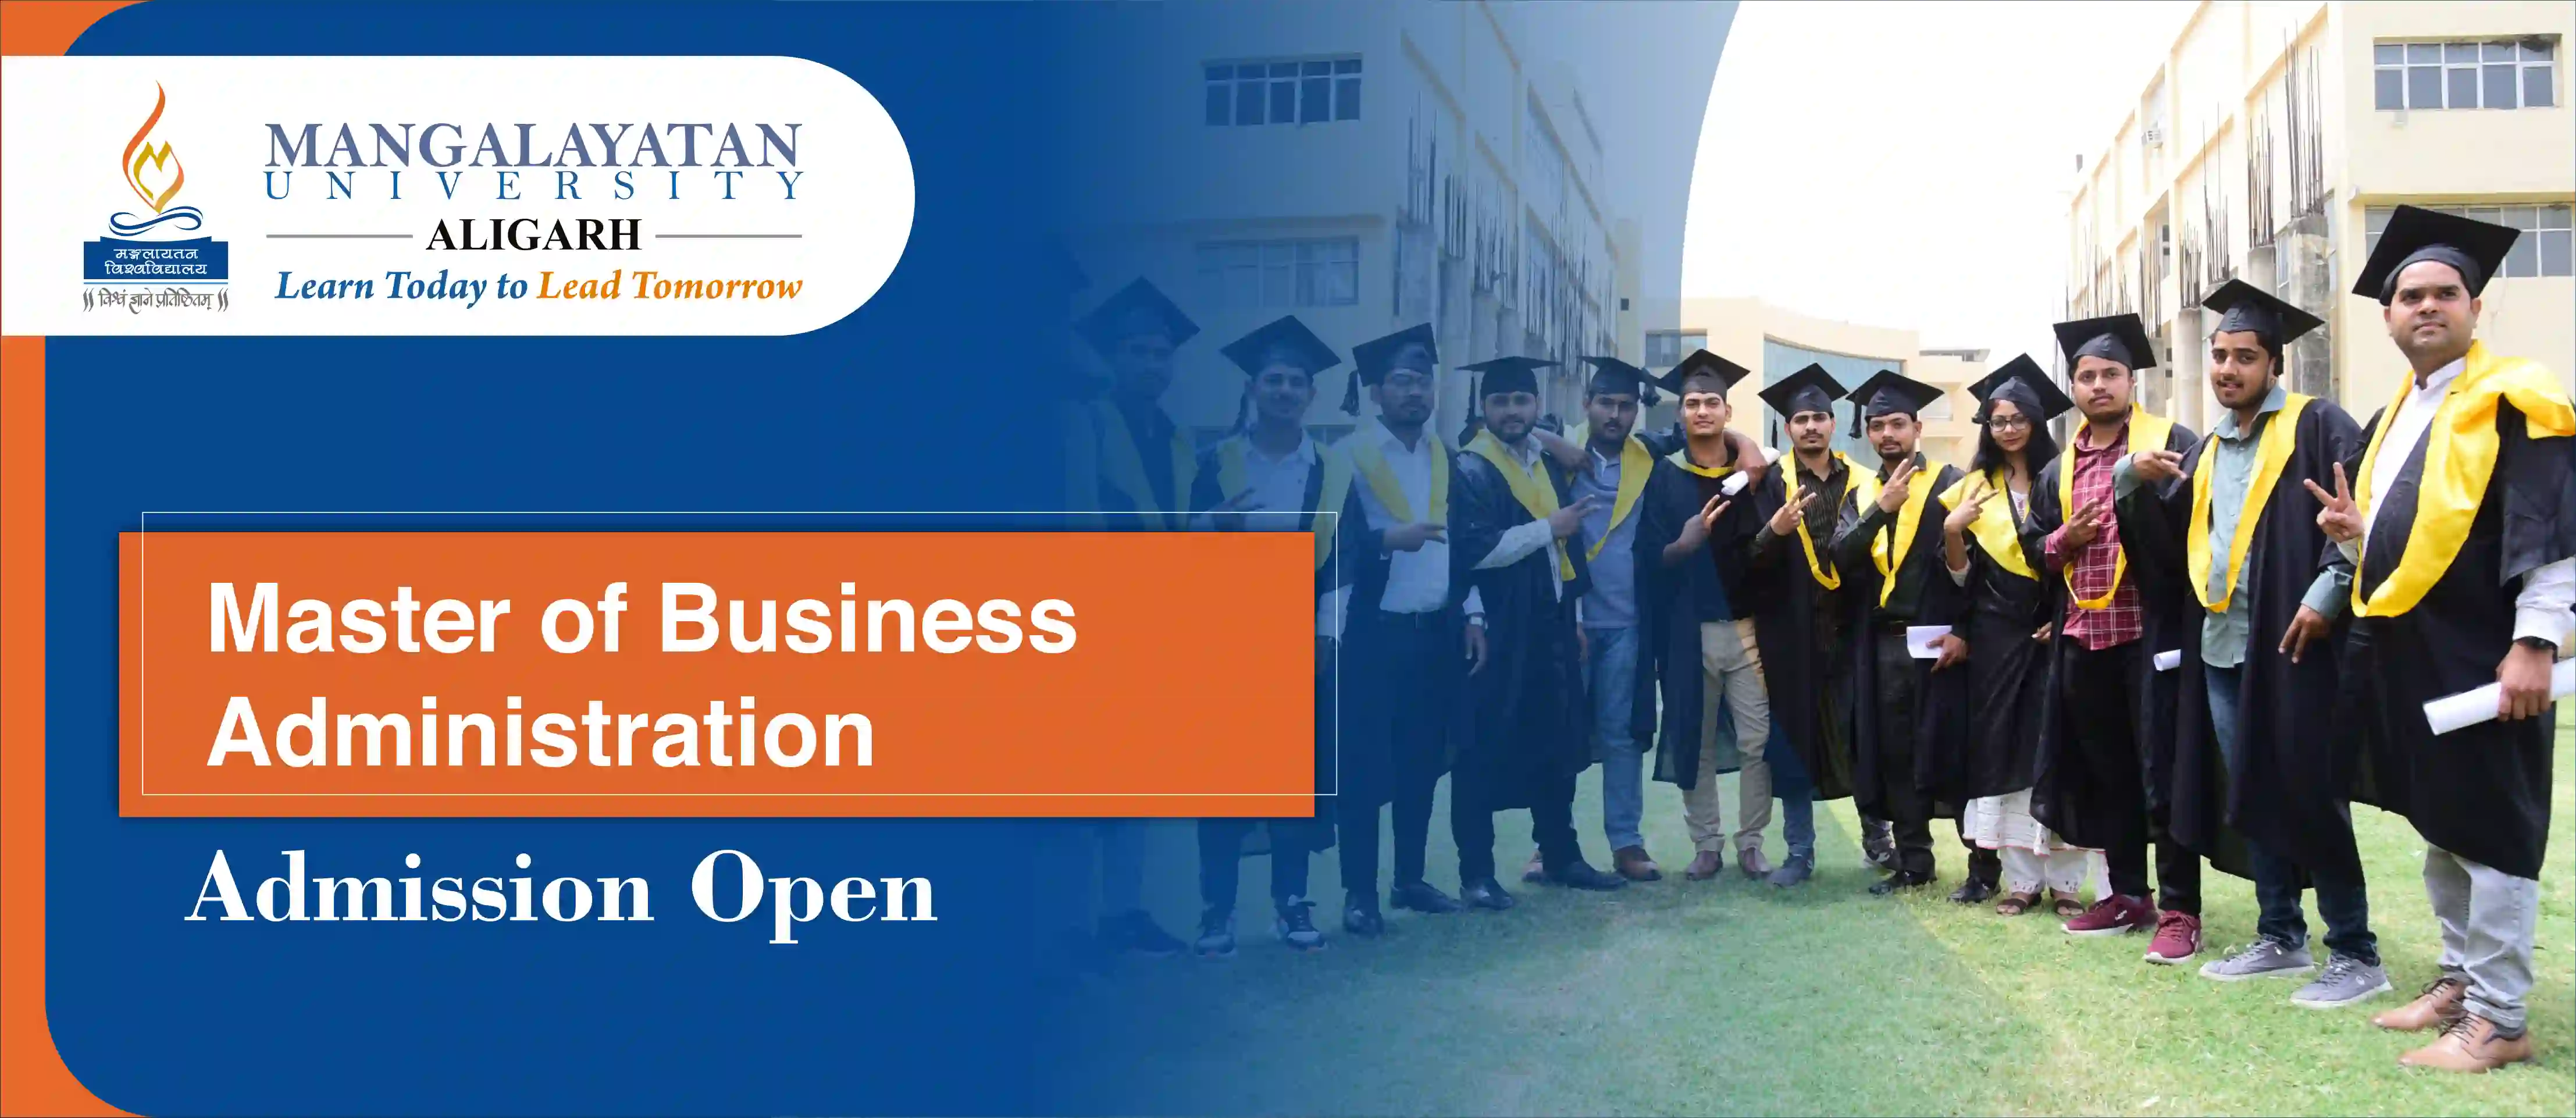 Master of Business Administration Admission